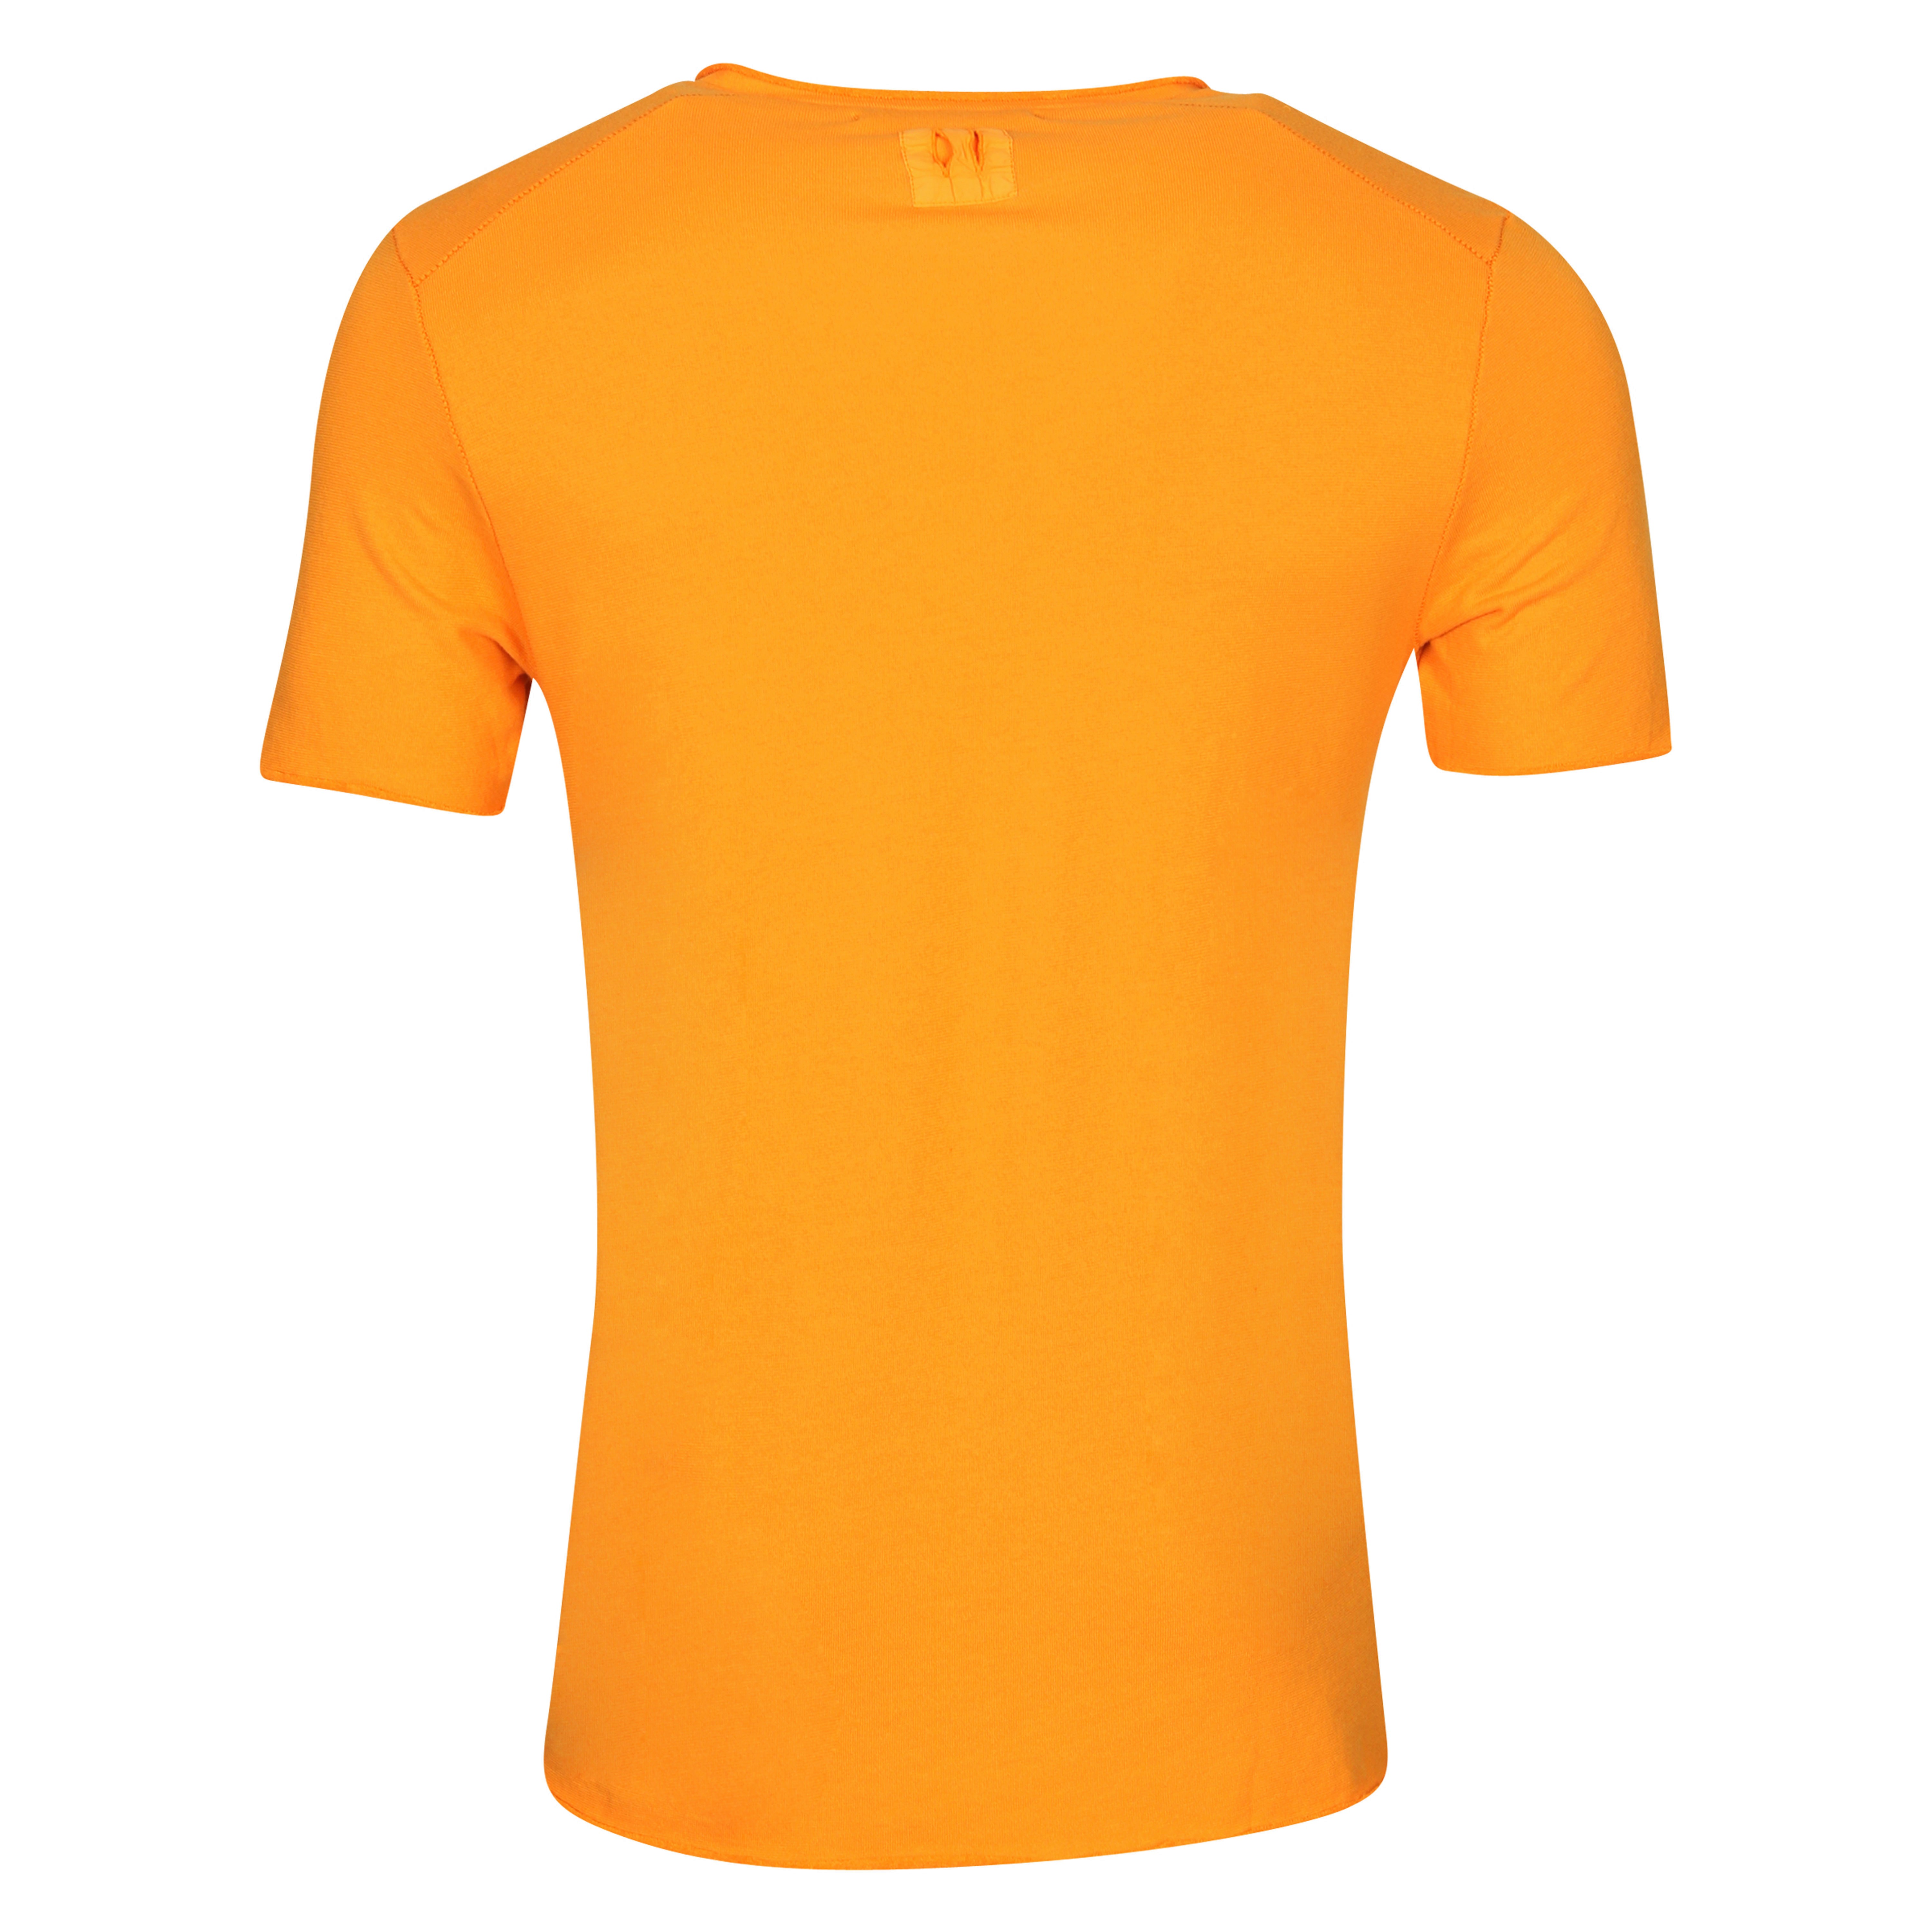 Hannes Roether Frottee V-Neck T-Shirt in Bellini L